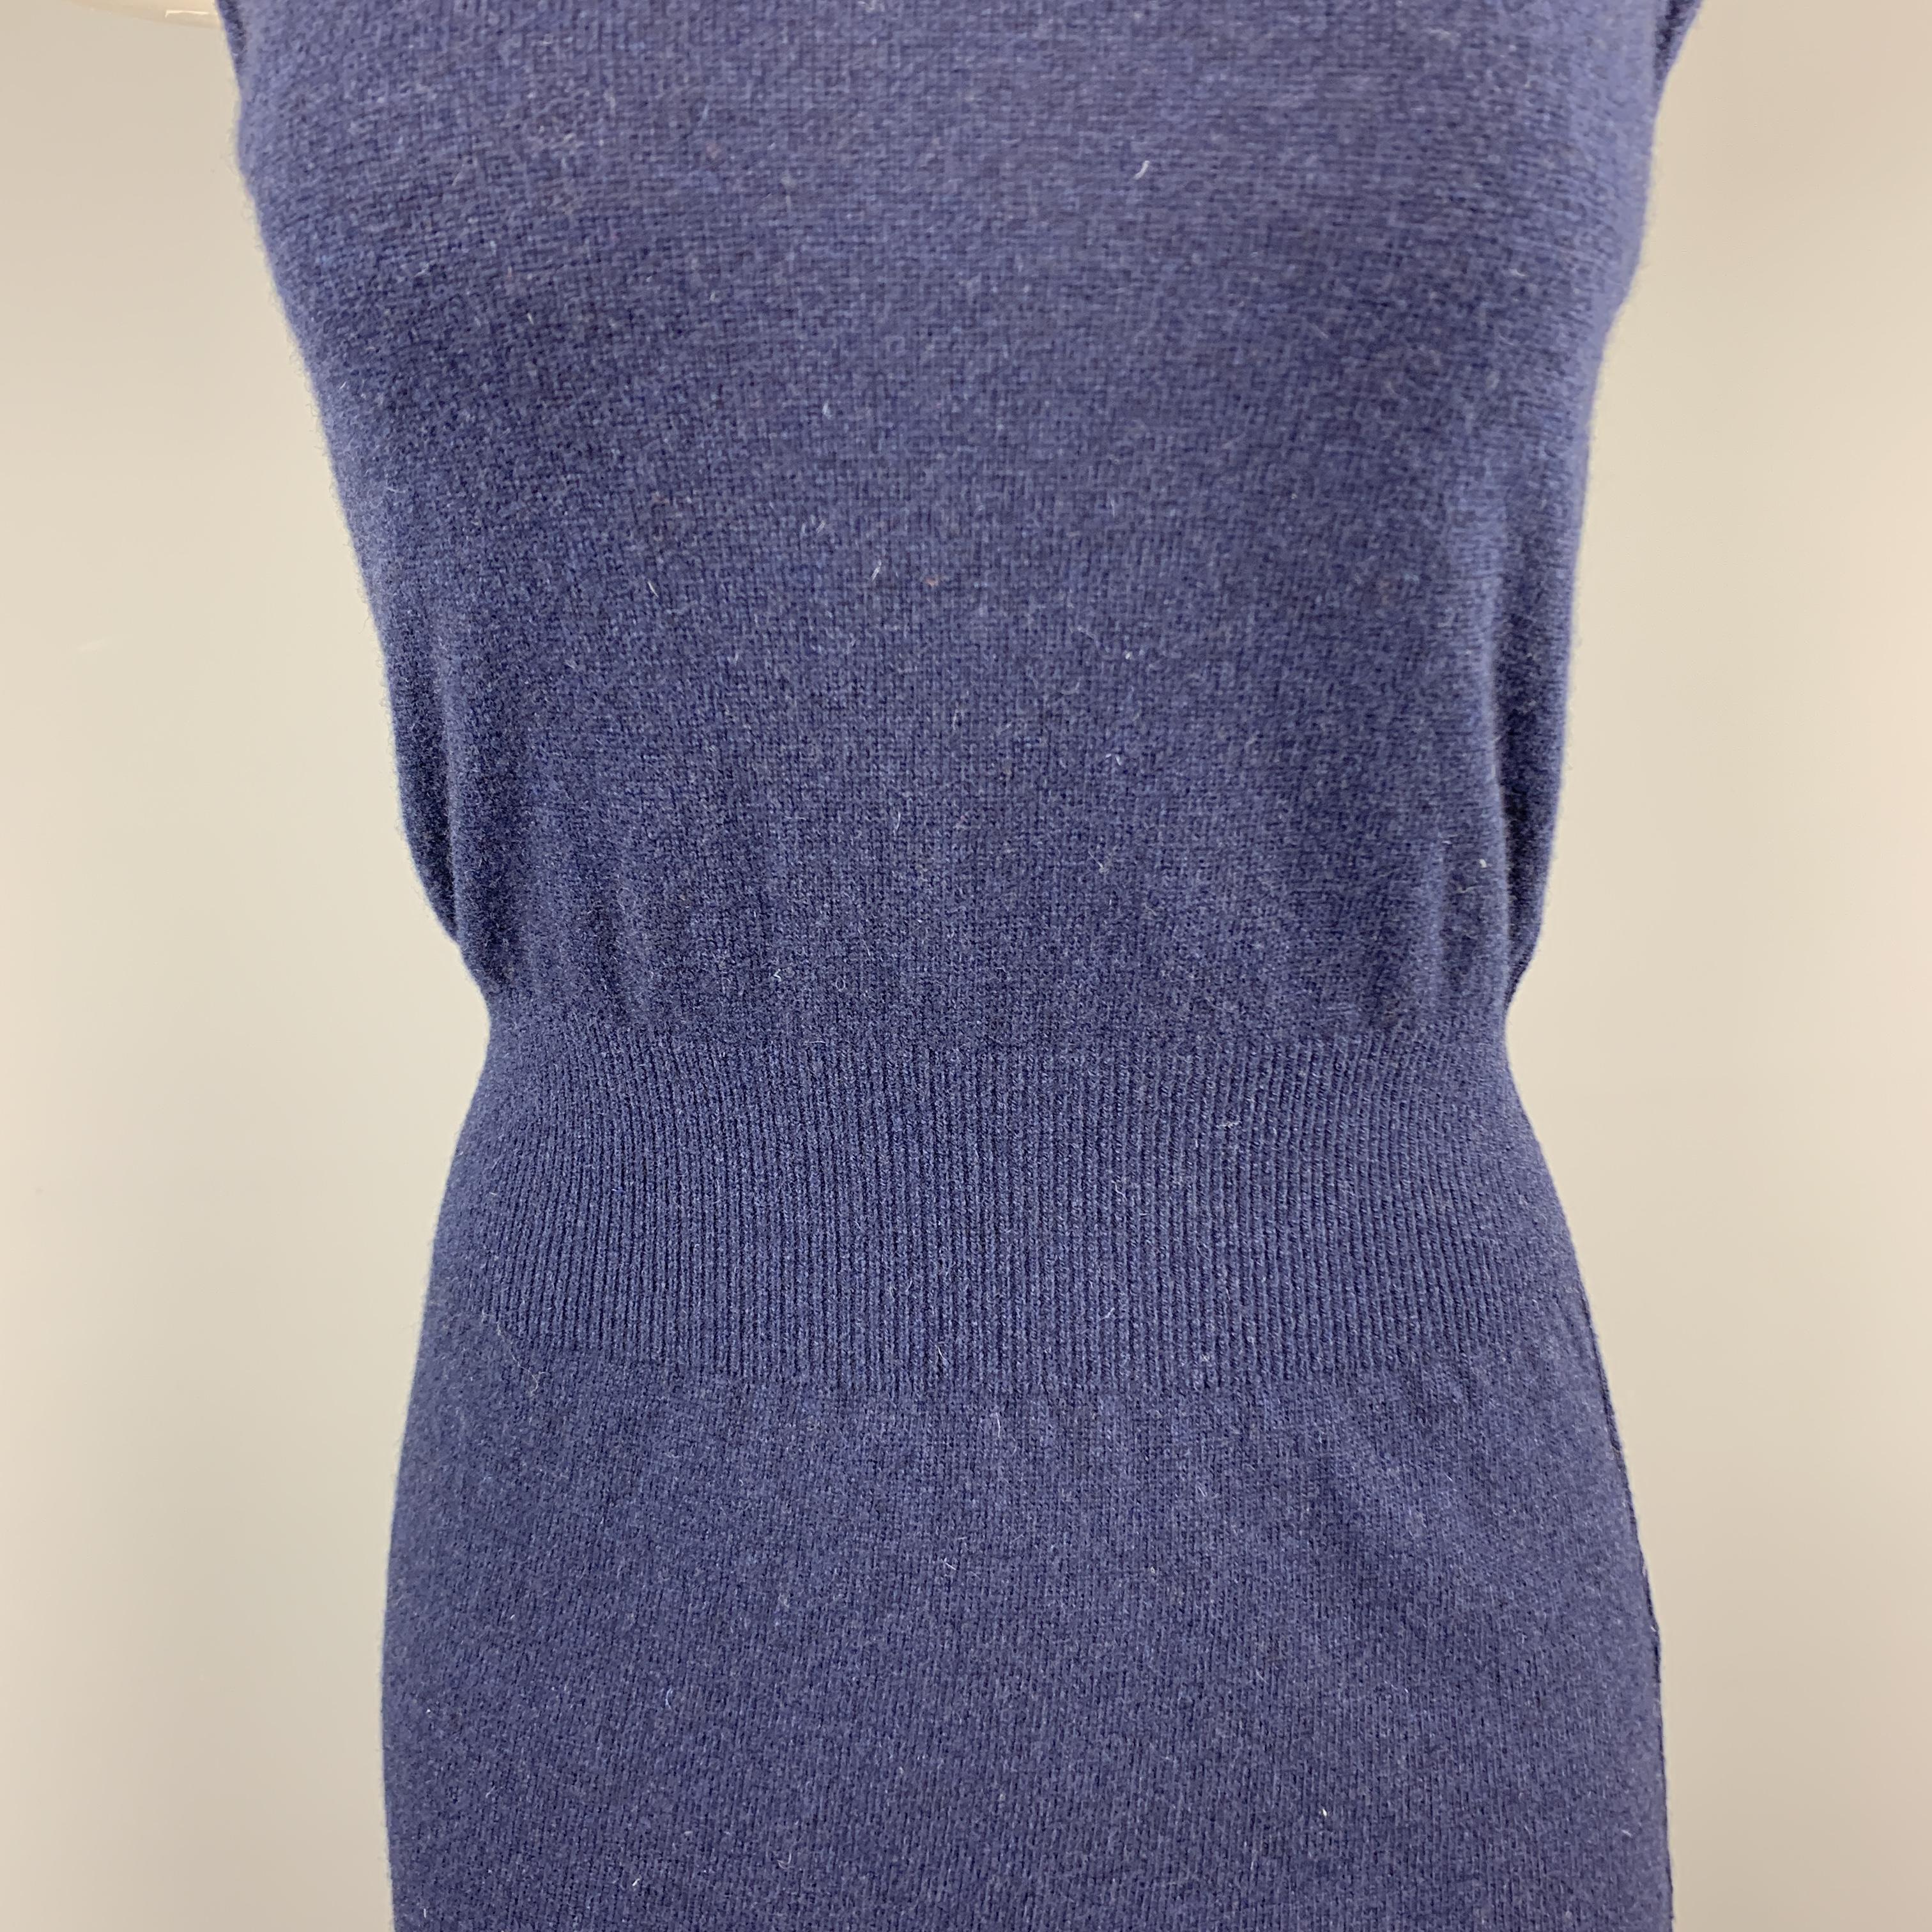 COMME des GARCONS tank top comes in navy wool blend knit with a scoop neck and cinched waistband. Made in Japan.

Very Good Pre-Owned Condition.
Marked: M

Measurements:

Shoulder: 12 in.
Bust: 33 in.
Length: 28 in.